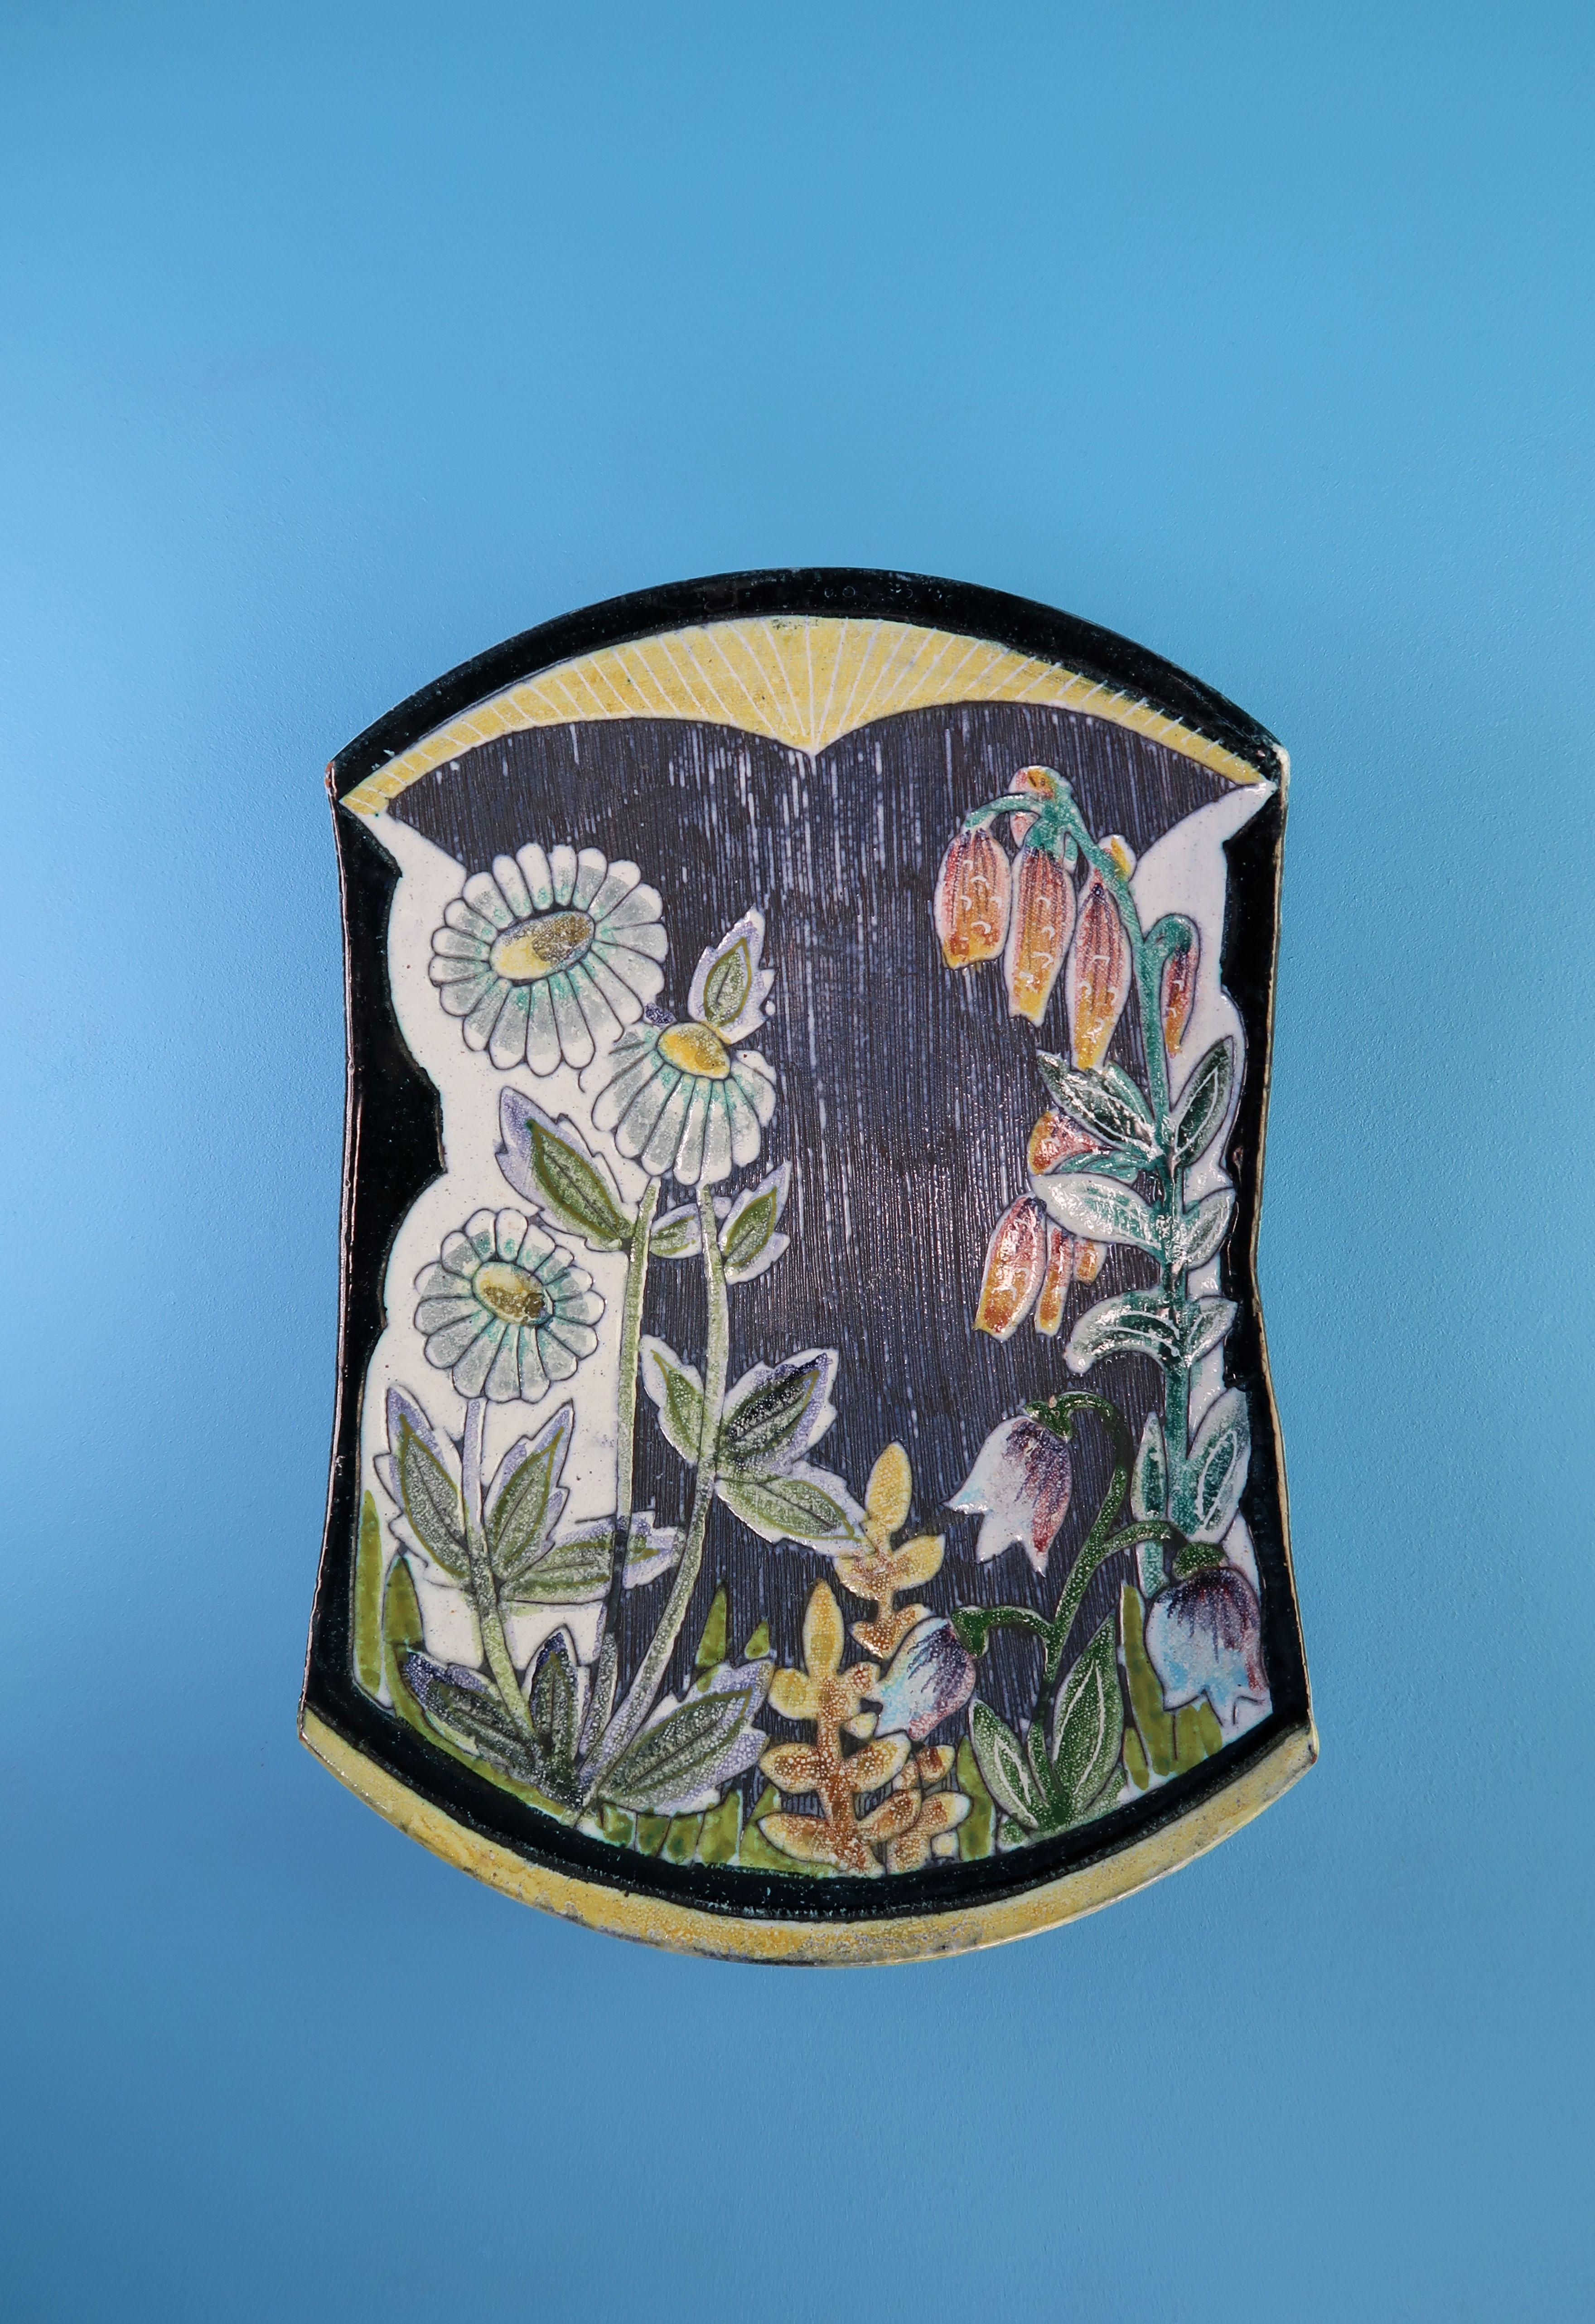 Handmade Mid-Century Modern ceramic wall platter by Swedish Tilgmans in 1957. Hand painted floral decor in white, yellow, orange, rose, light blue and green colors on black base. Light blue glaze and lilac floral decor on the back. Rectangular shape